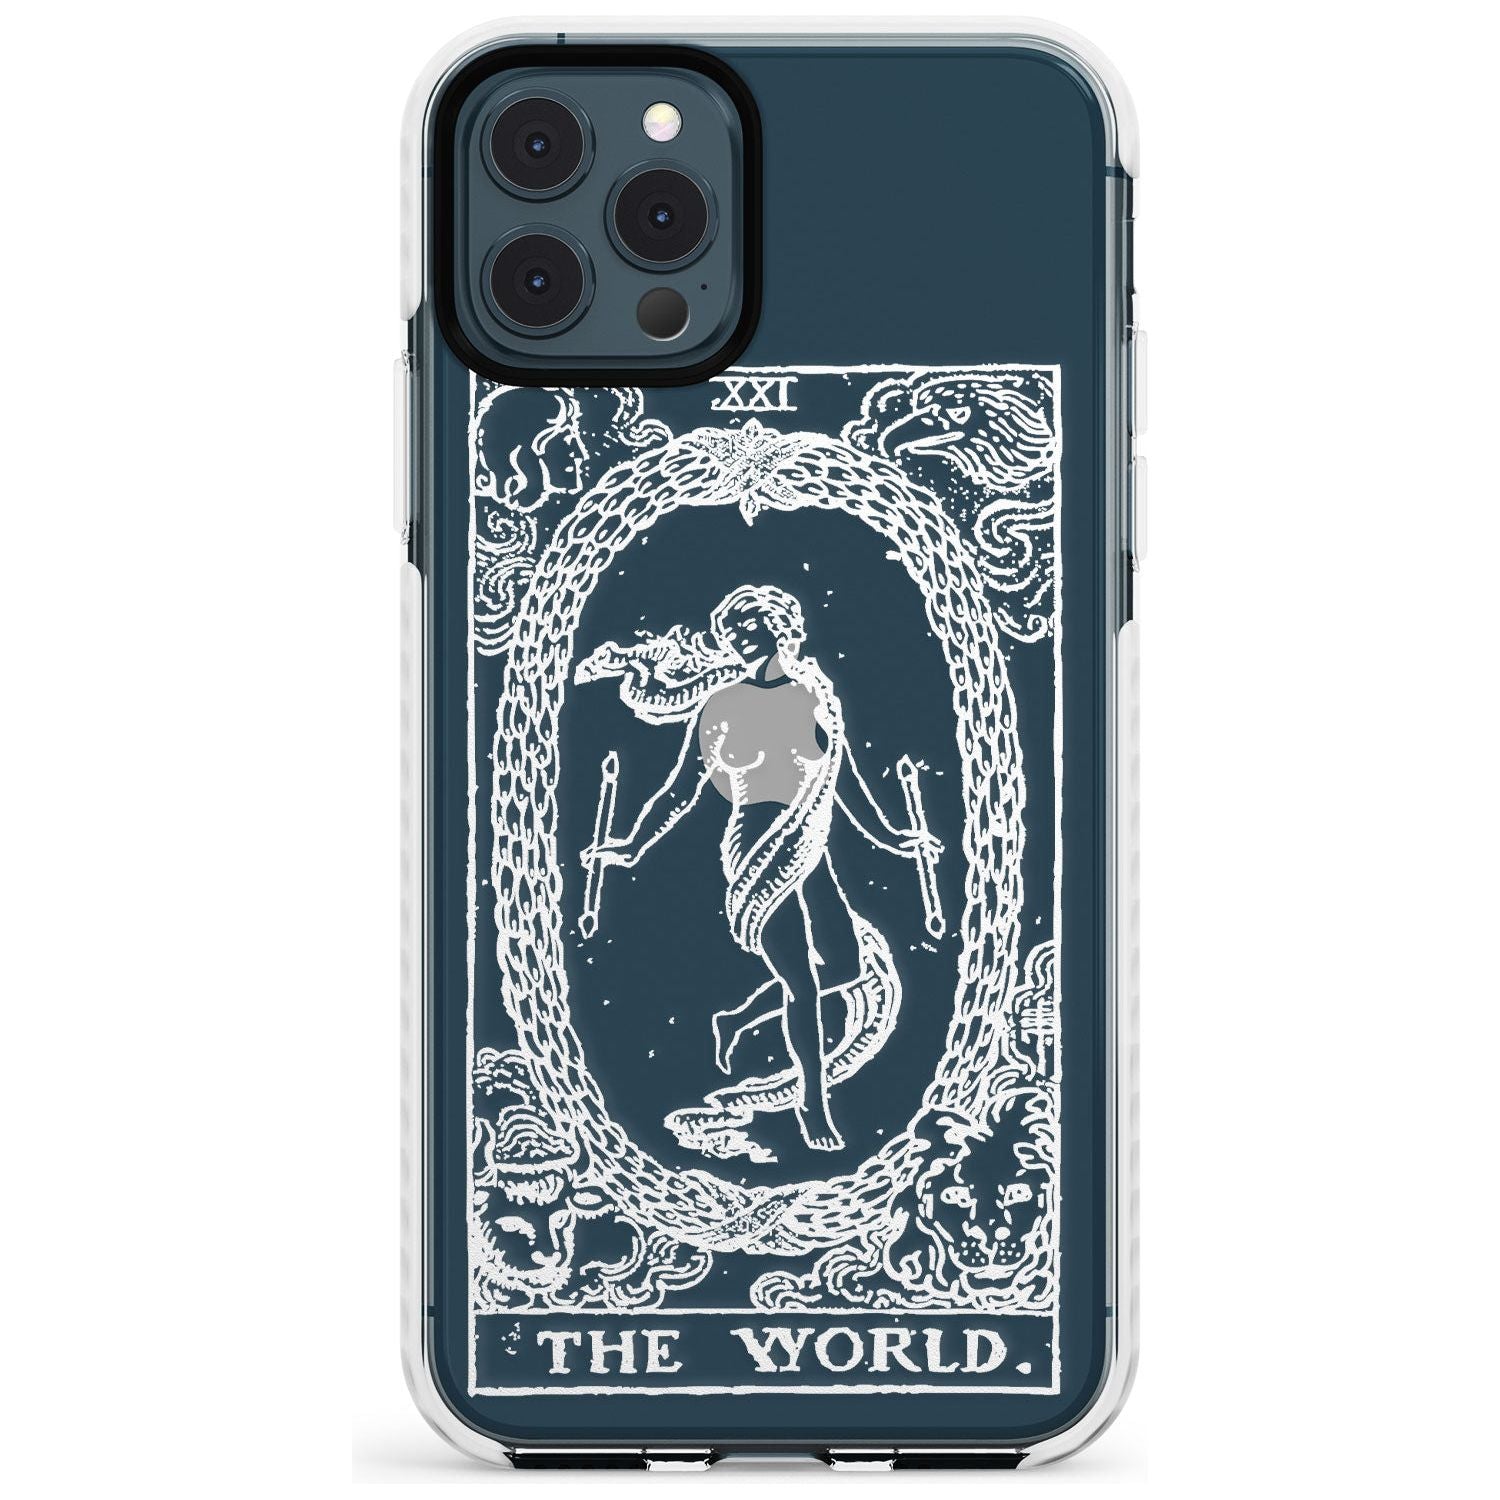 The World Tarot Card - White Transparent Slim TPU Phone Case for iPhone 11 Pro Max